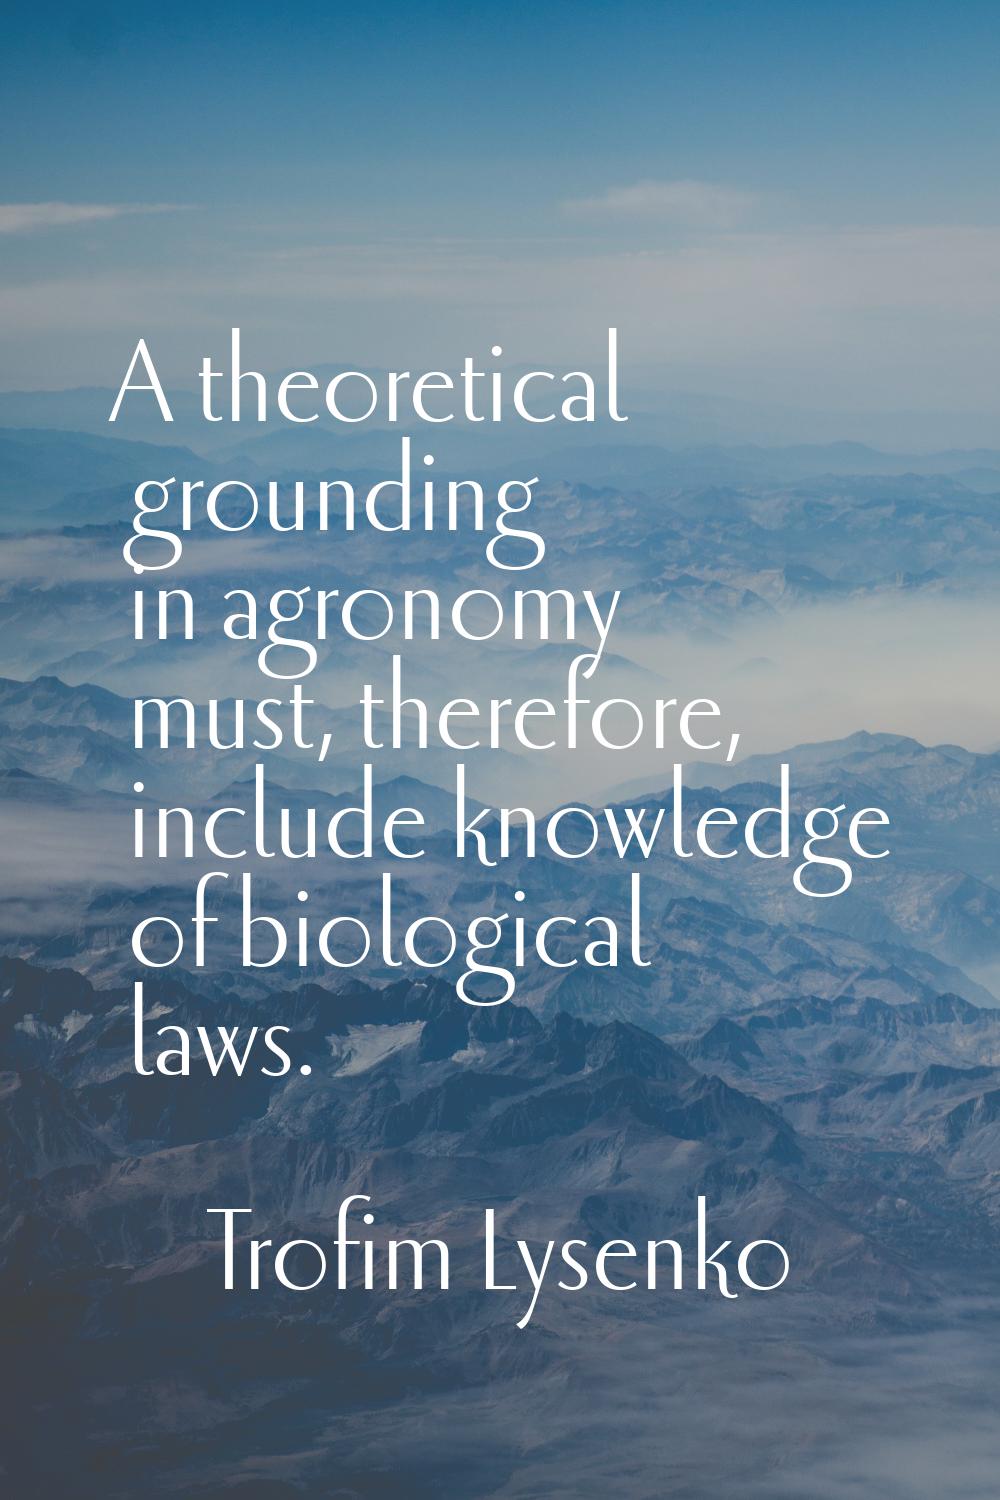 A theoretical grounding in agronomy must, therefore, include knowledge of biological laws.